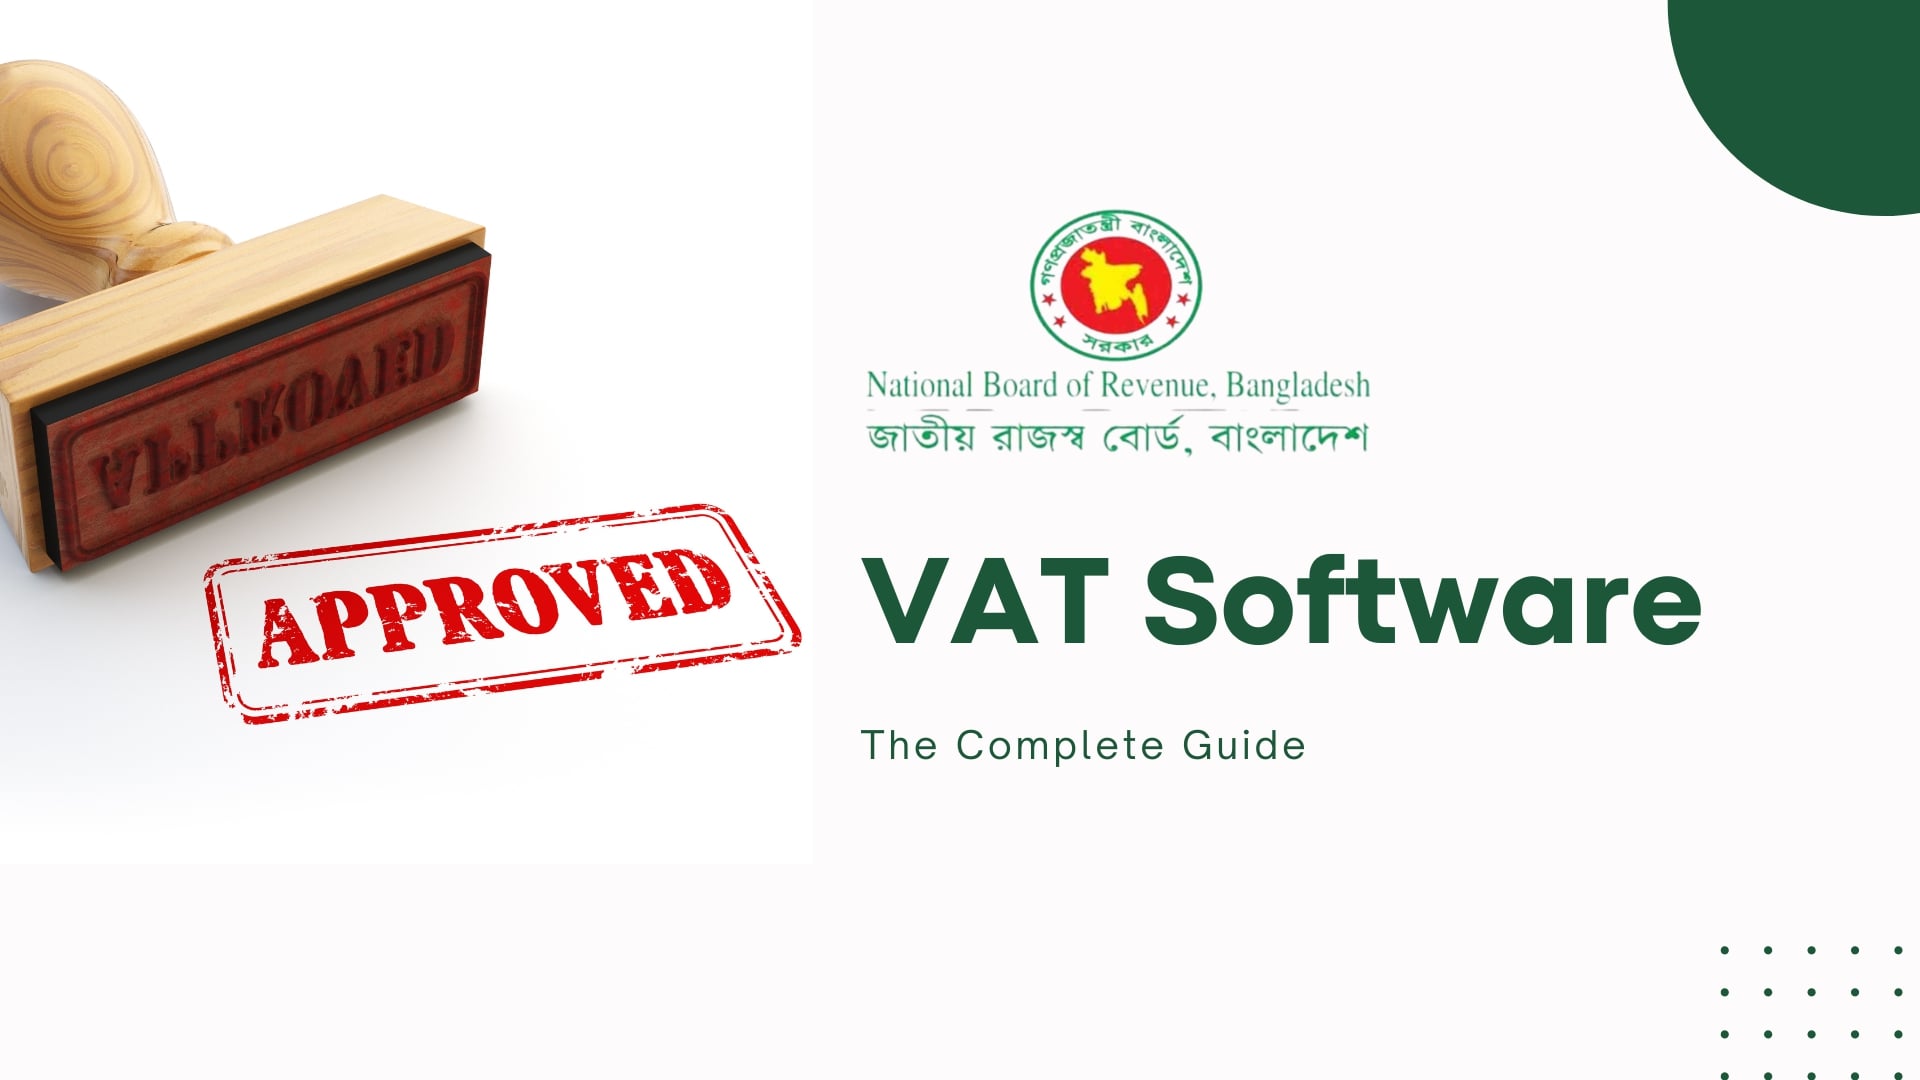 NBR Approved VAT Software The Complete Guide